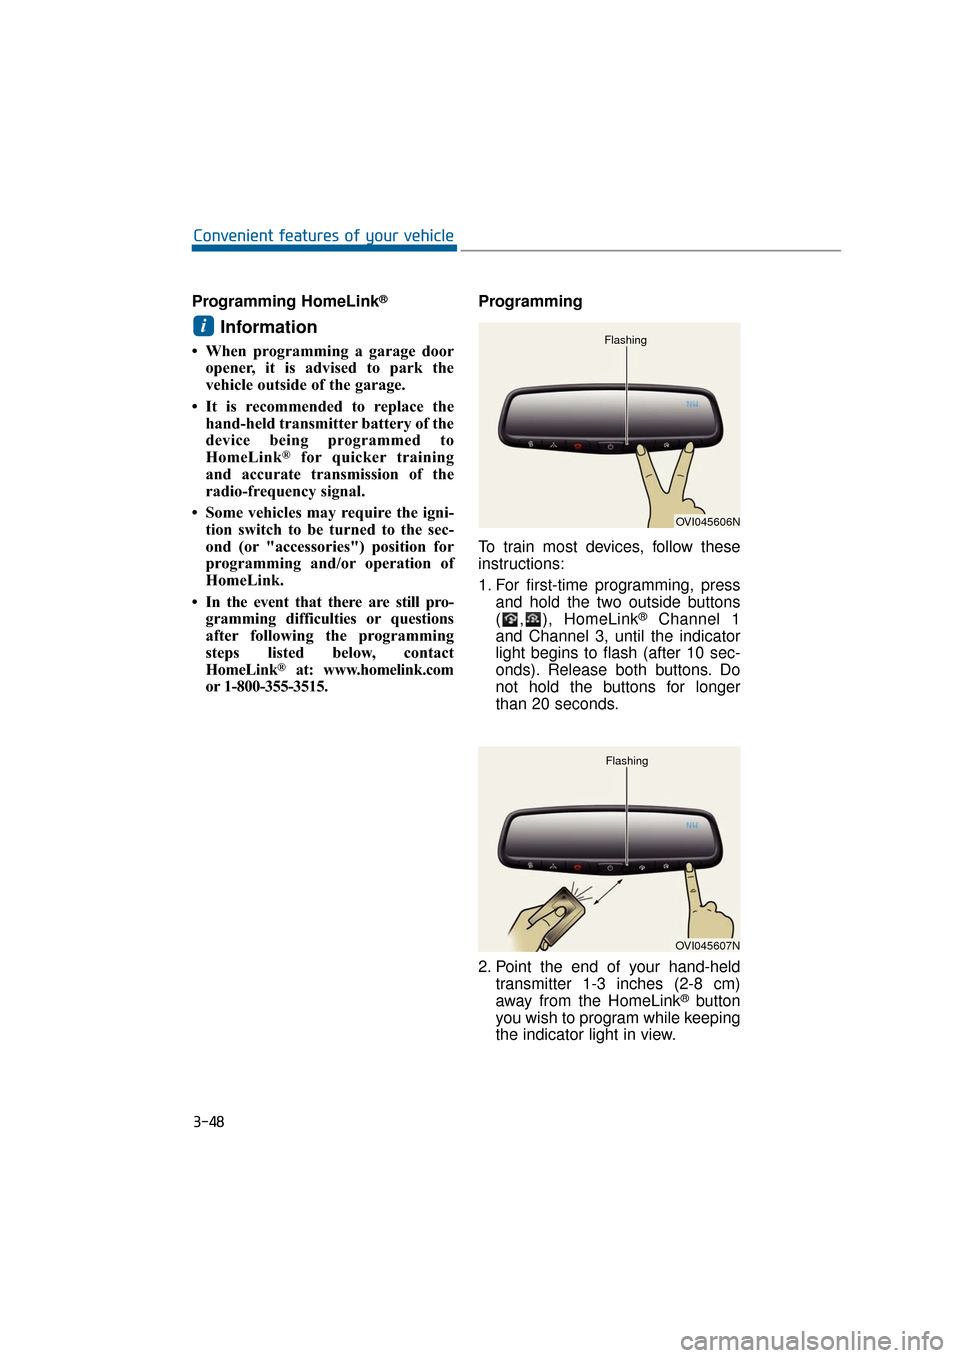 Hyundai Equus 2016  Owners Manual Programming HomeLink®
Information
• When programming a garage dooropener, it is advised to park the
vehicle outside of the garage.
• It is recommended to replace the hand-held transmitter battery